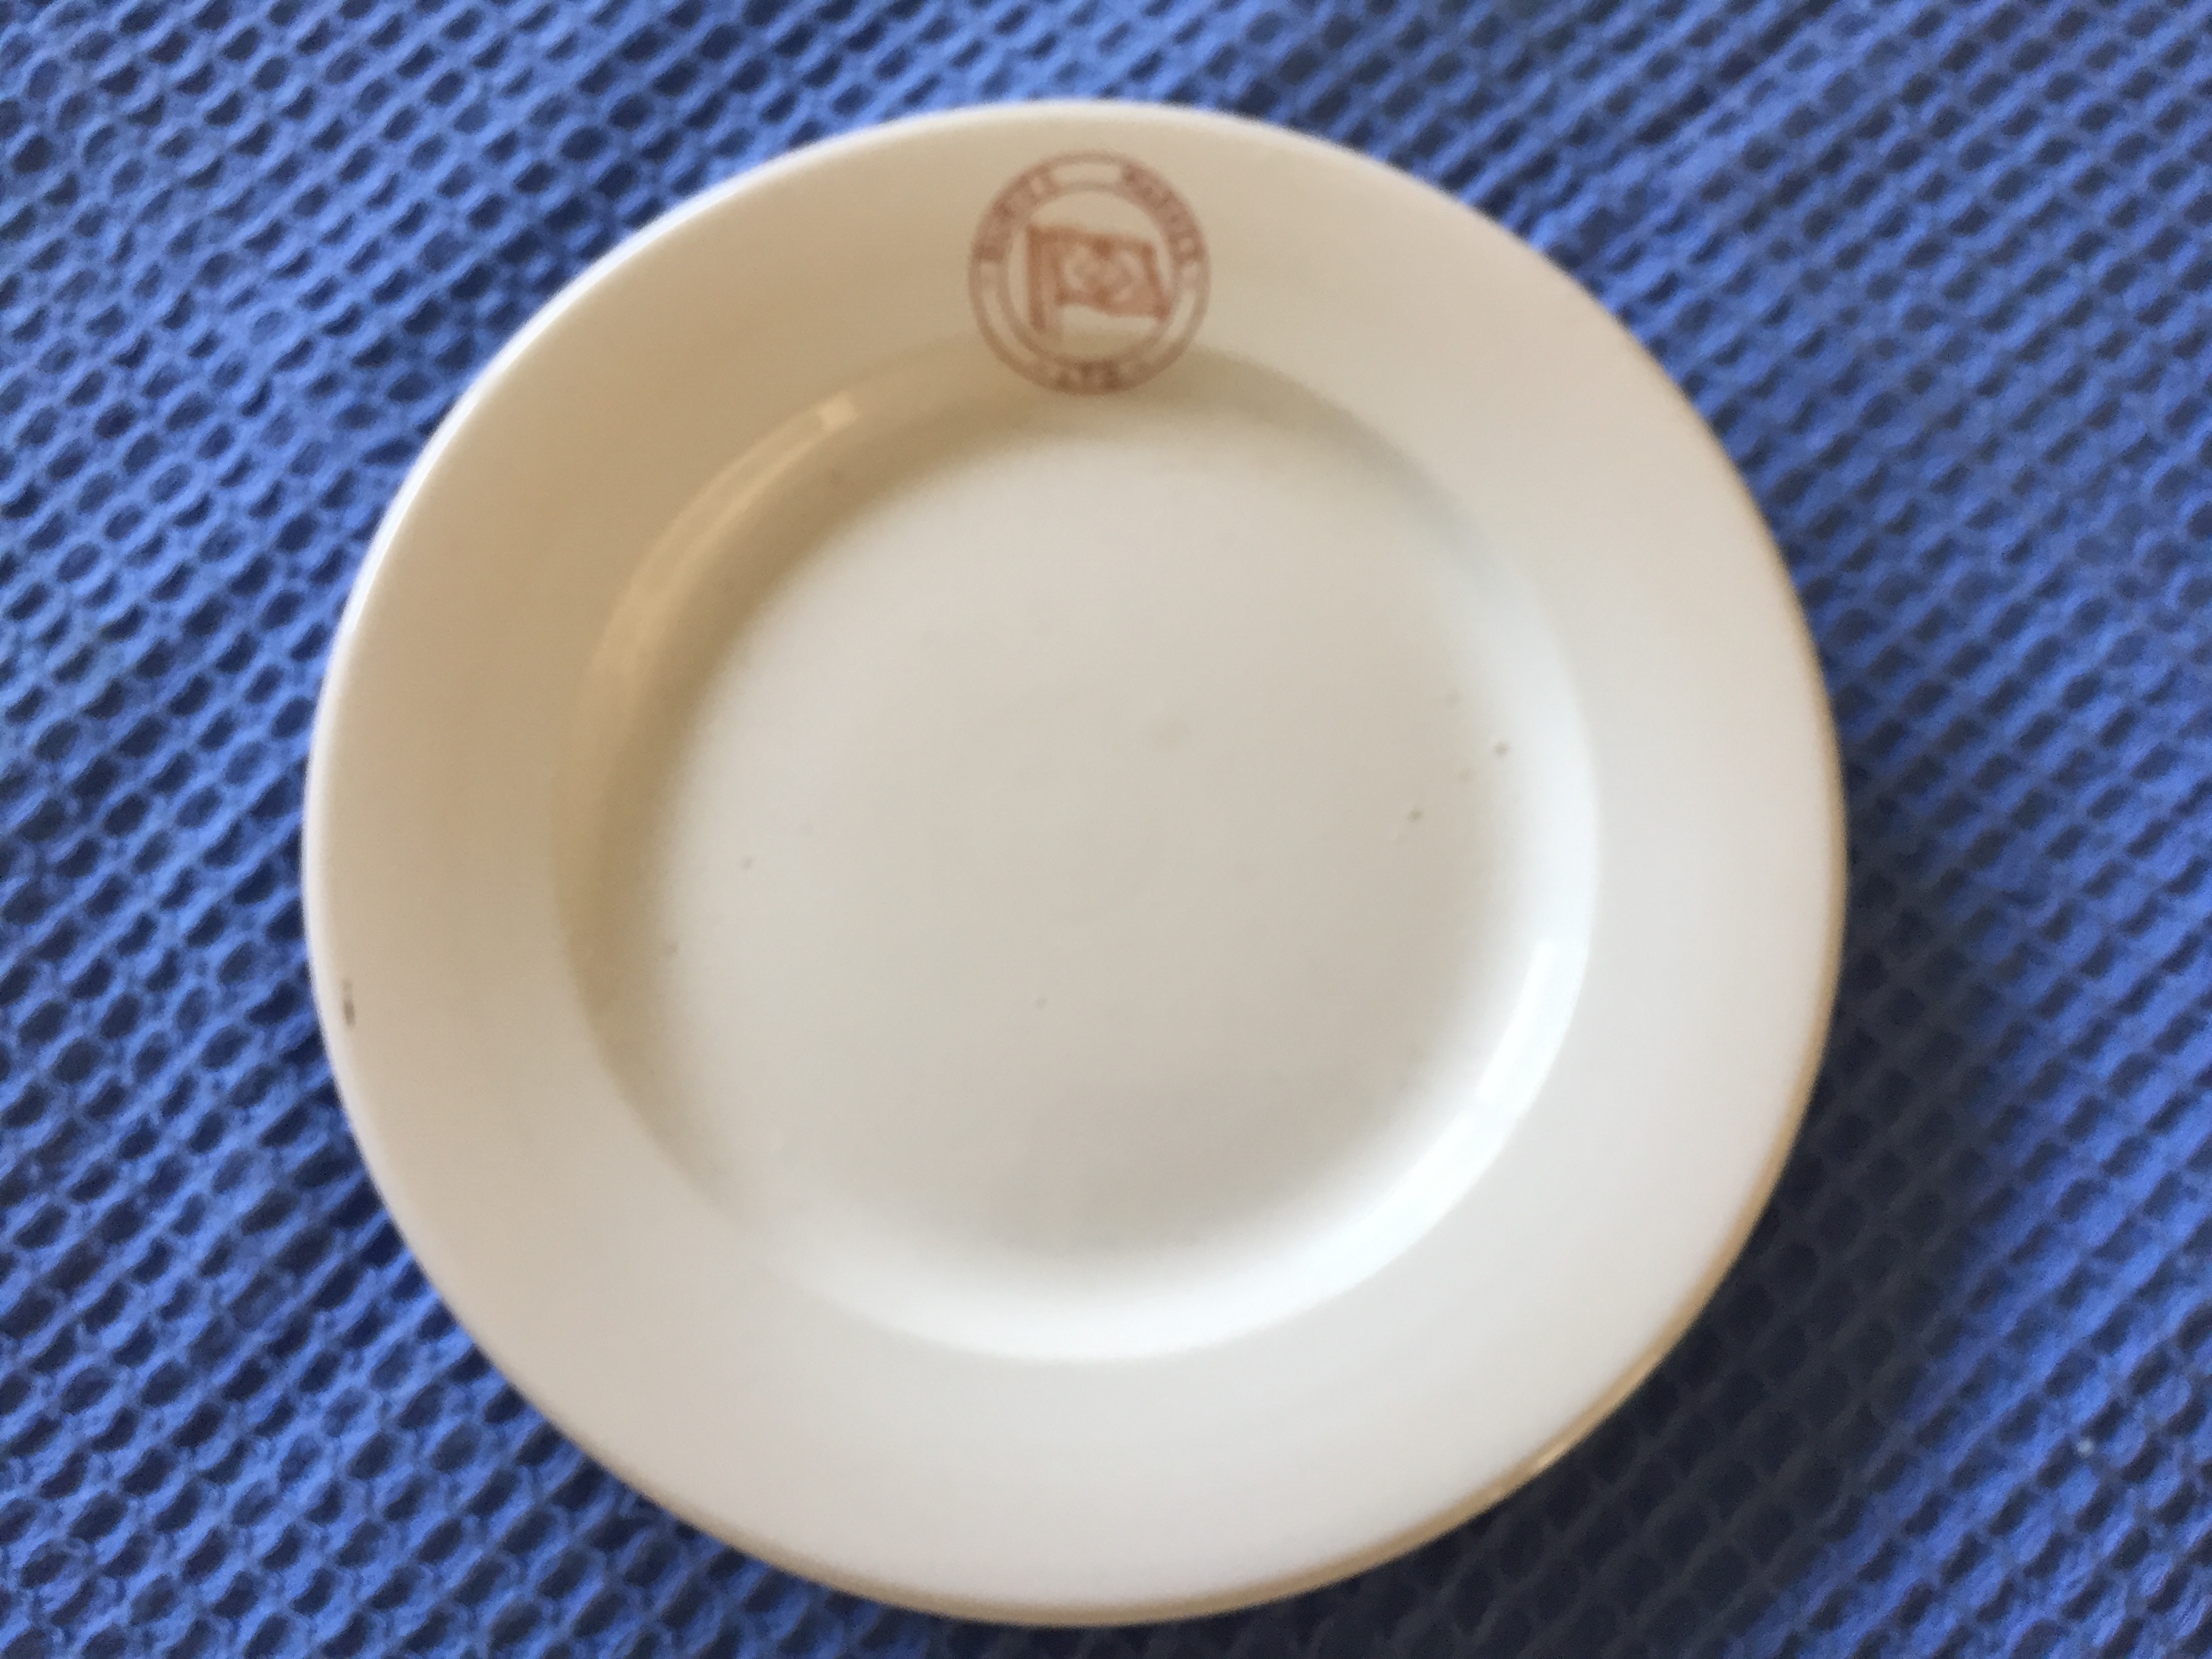 RARE SHIPS DINING PLATE FROM THE BURIES MARKS LINE SHIPPING COMPANY